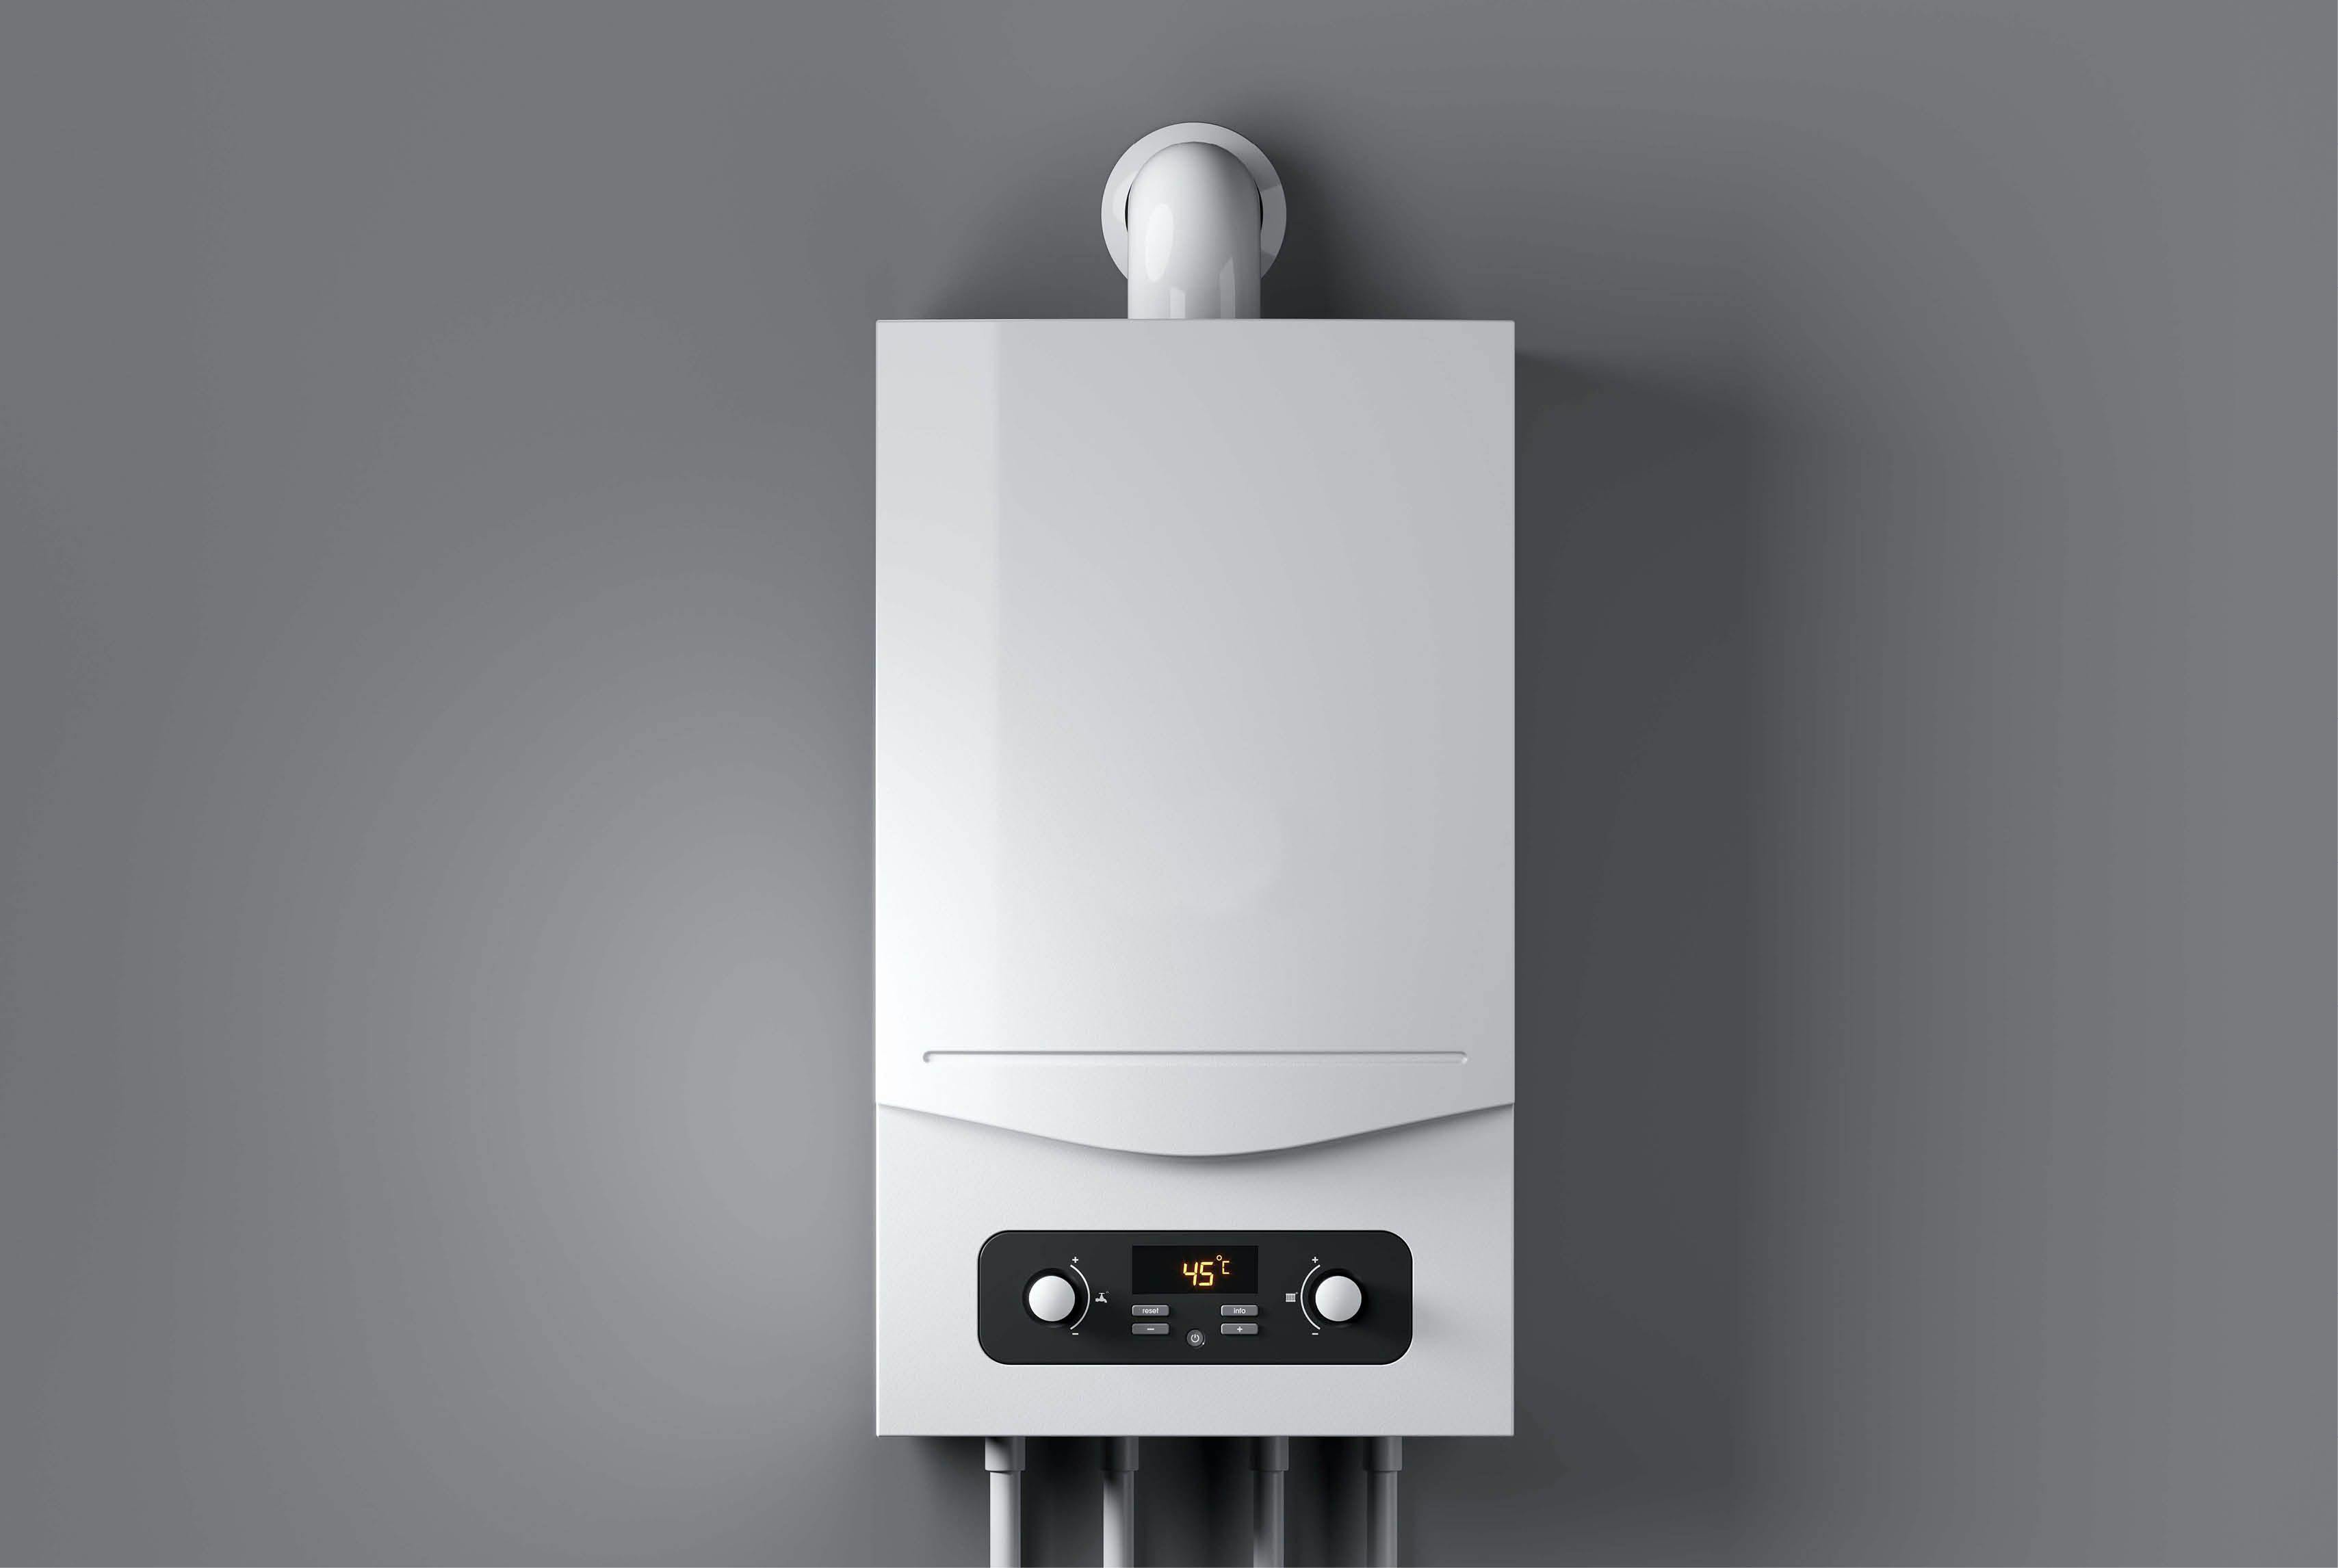 gas boiler mounted on a wall